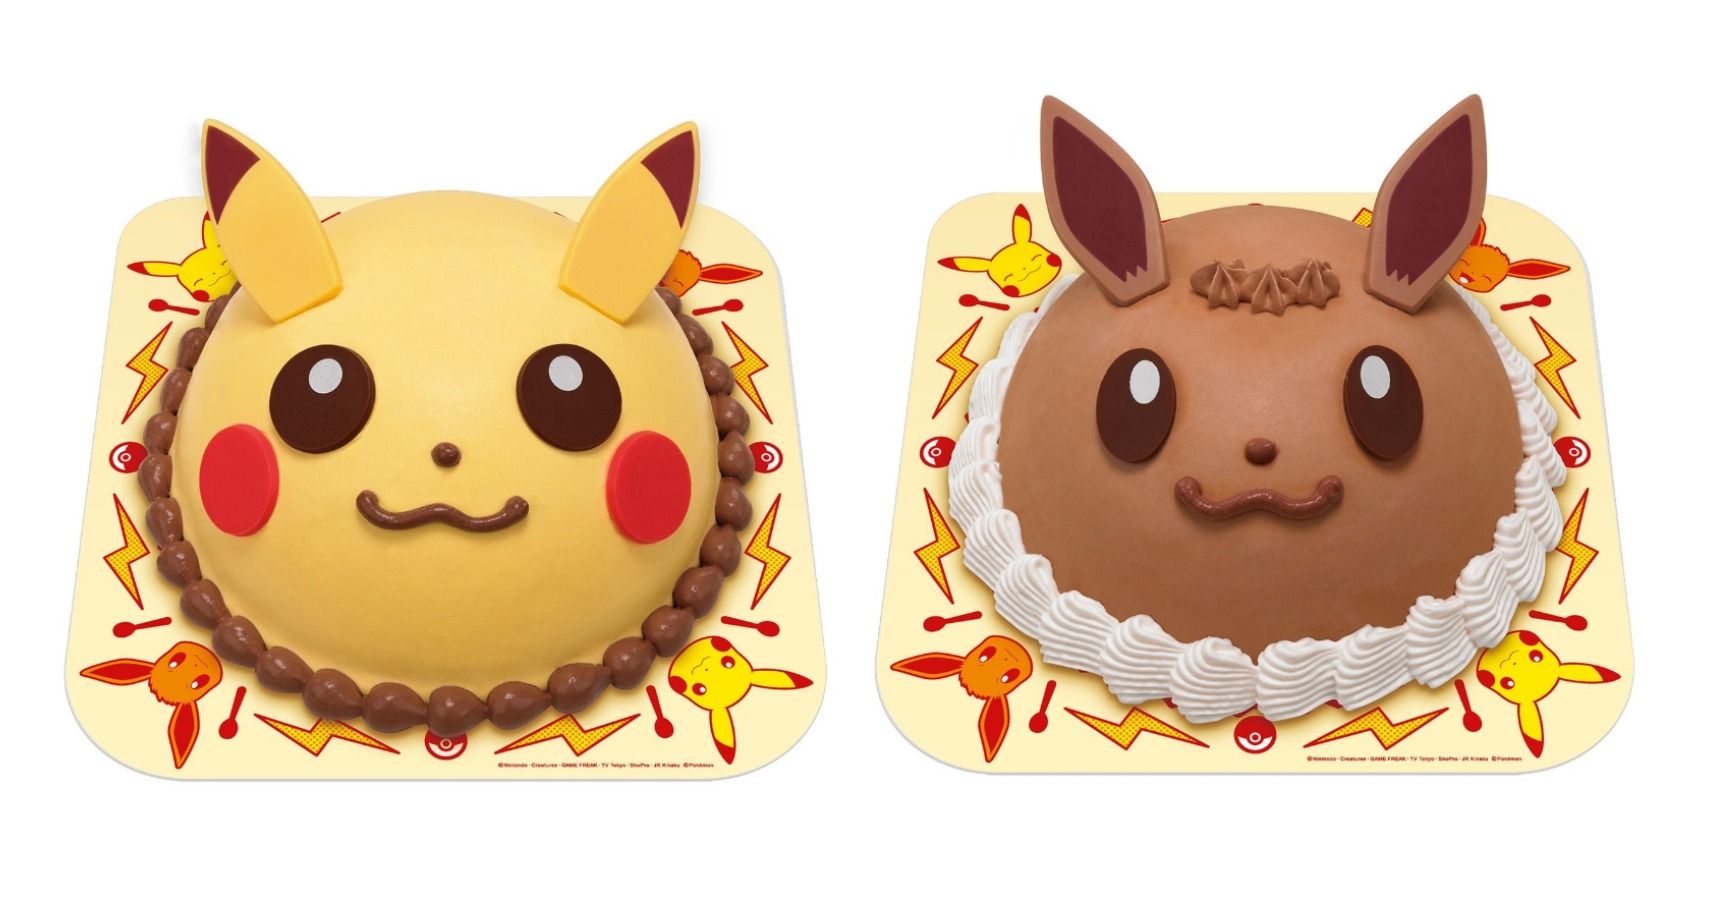 The Next Pokémon Movie Is Being Promoted In Japan With Ice Cream Cakes In The Shape Of Eevee & Pikachus Heads